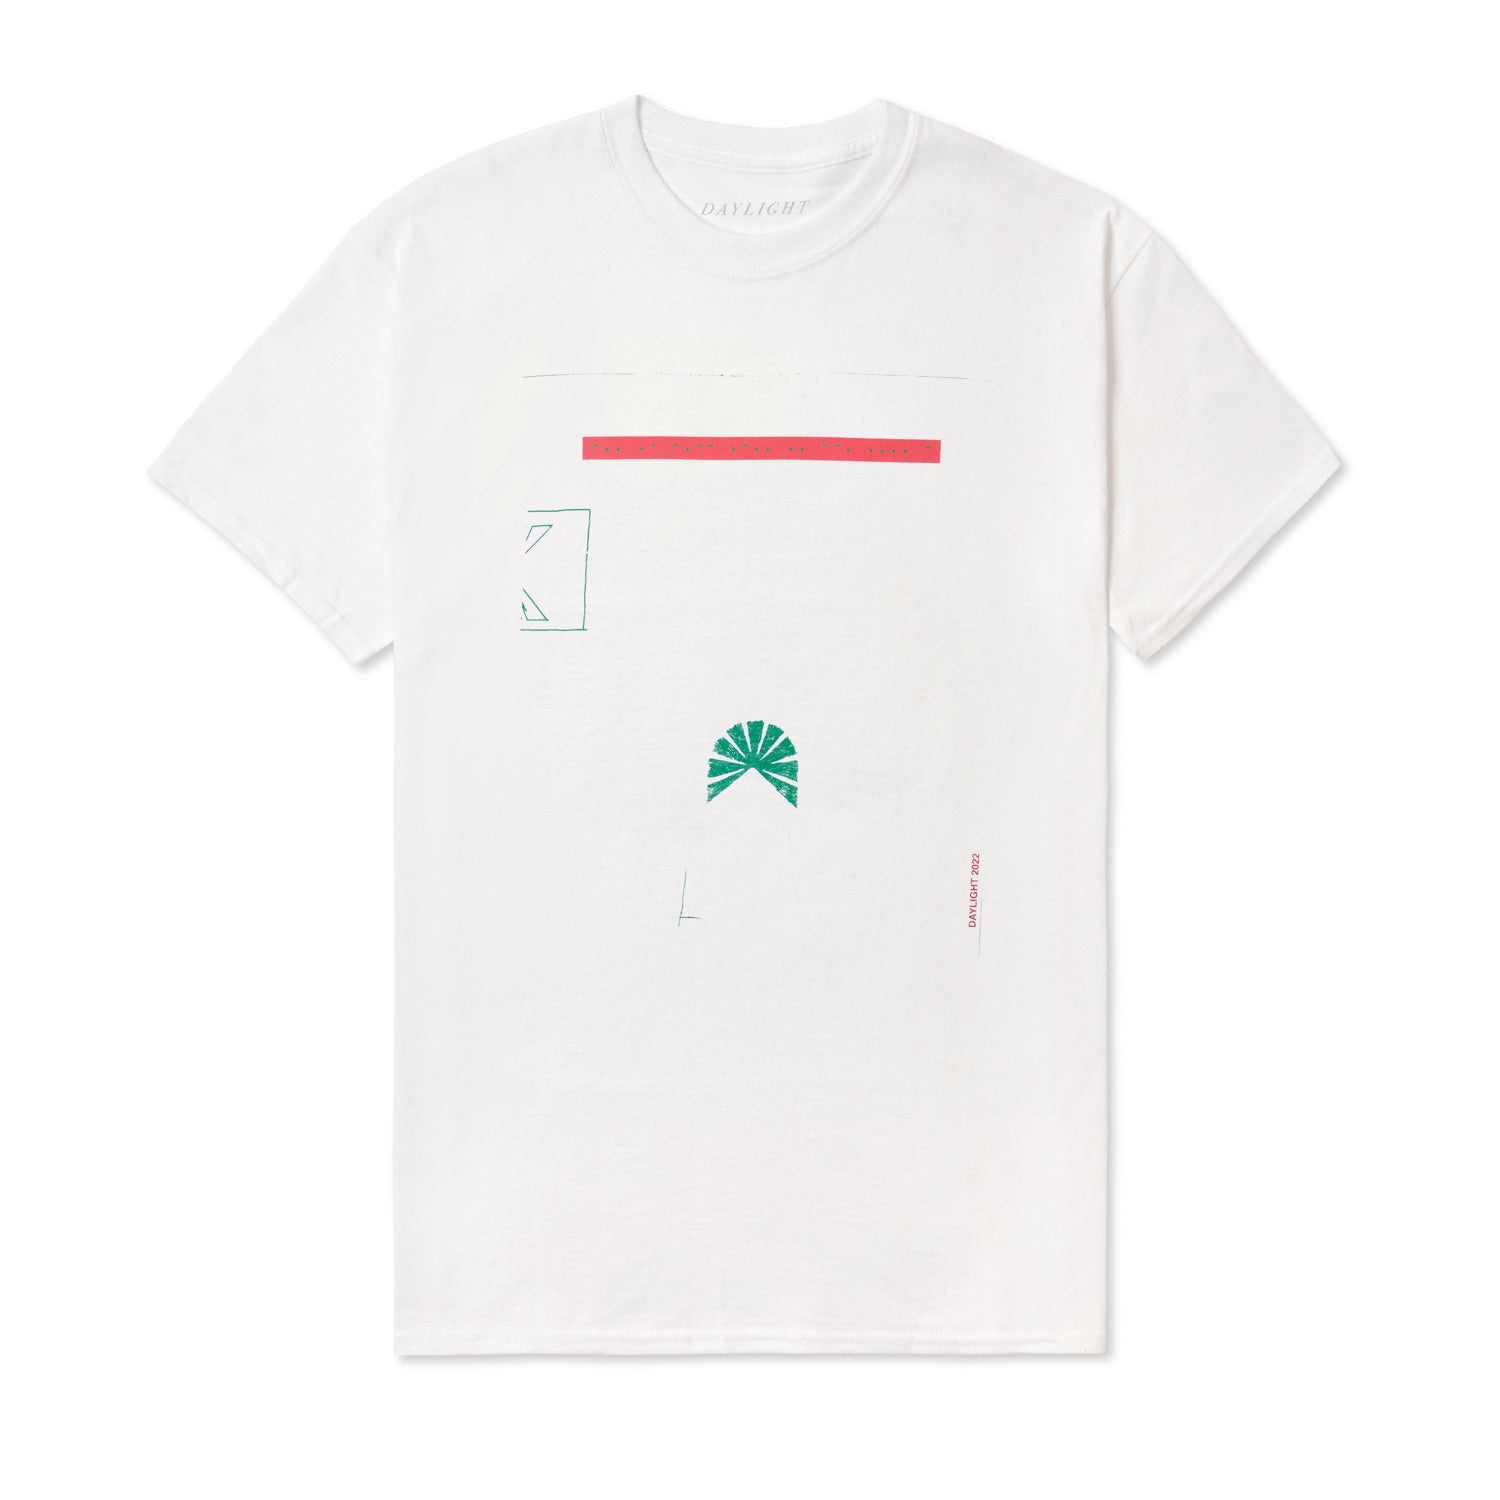 Frequency Tee, White